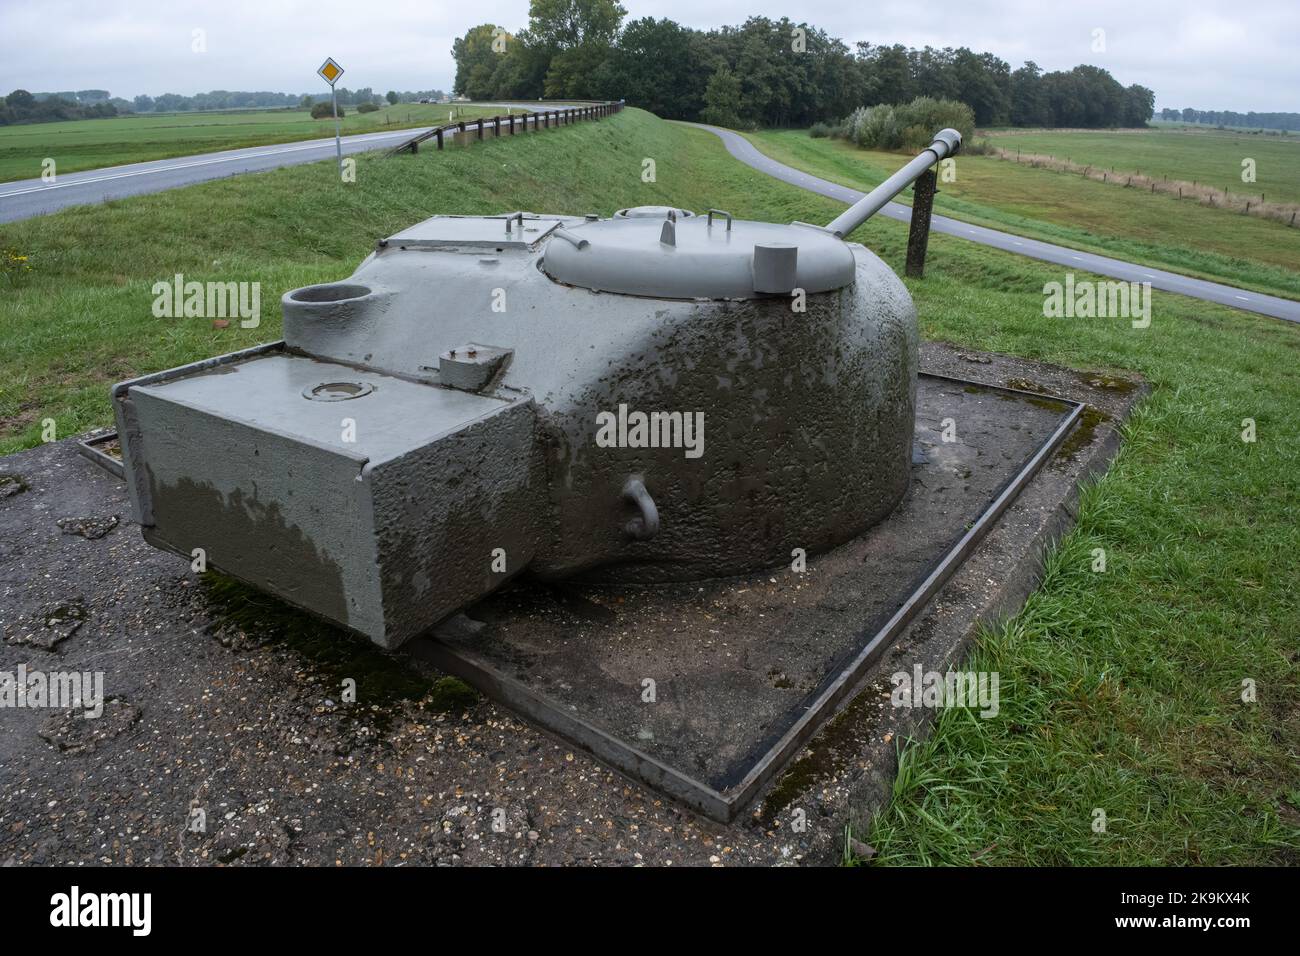 Olst, Netherlands - Oct 14, 2022: After the war, many Sherman turrets were used as artillery in bunkers that were part of the IJssellinie till the Ger Stock Photo